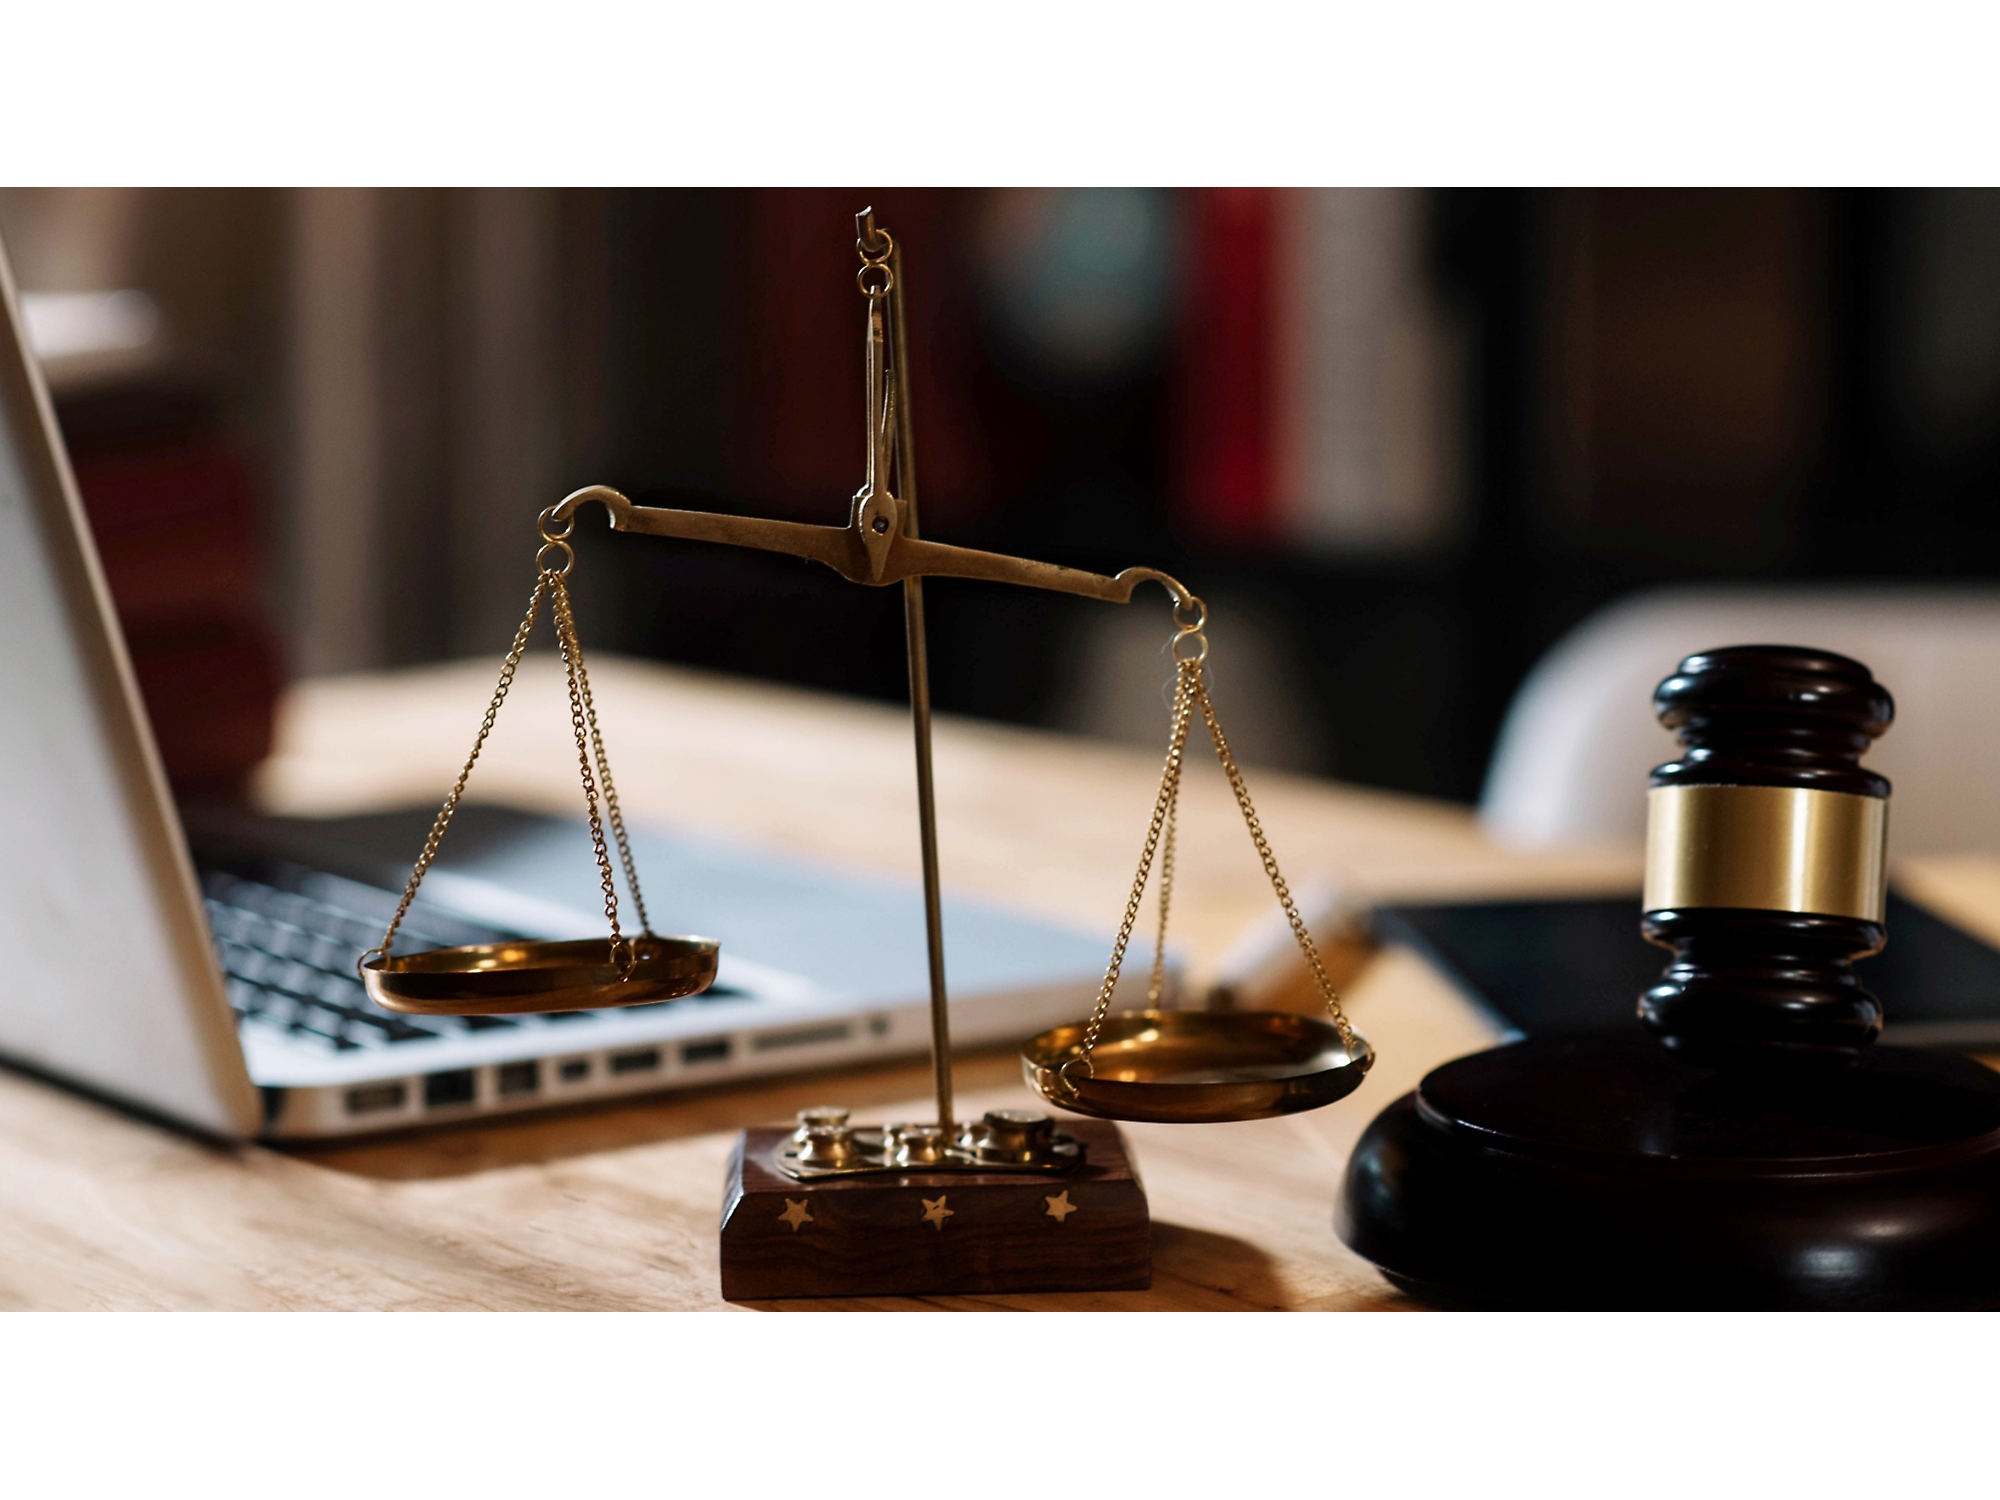 A wooden gavel and a set of scales on a desk, with a laptop in the background, symbolizing legal practice in an office setting.